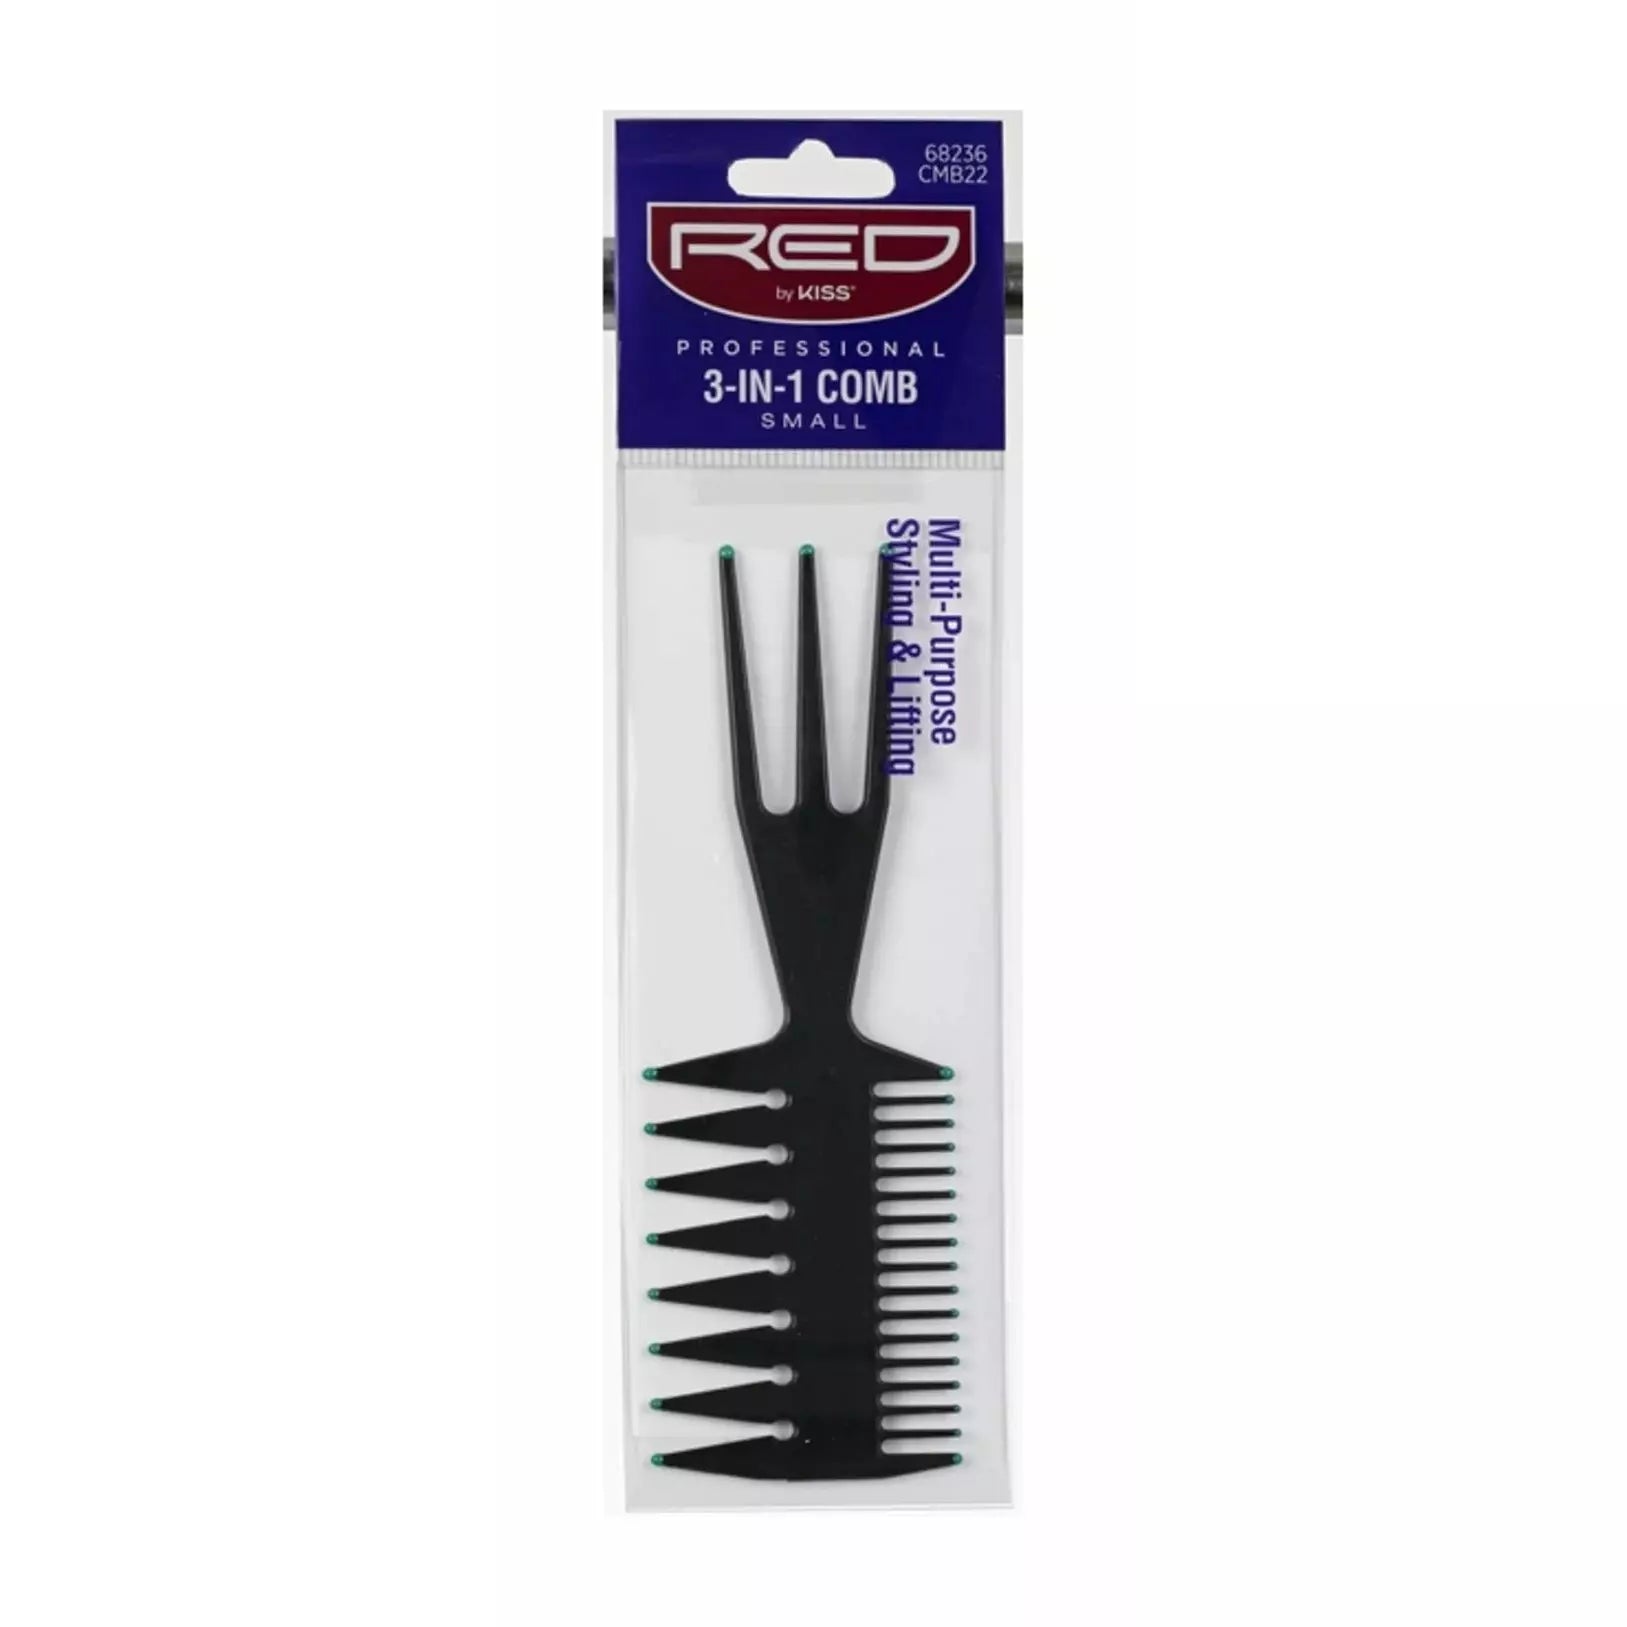 RED BY KISS PROFESSIONAL 3-IN-1 COMB #CMB22-RED- Hive Beauty Supply